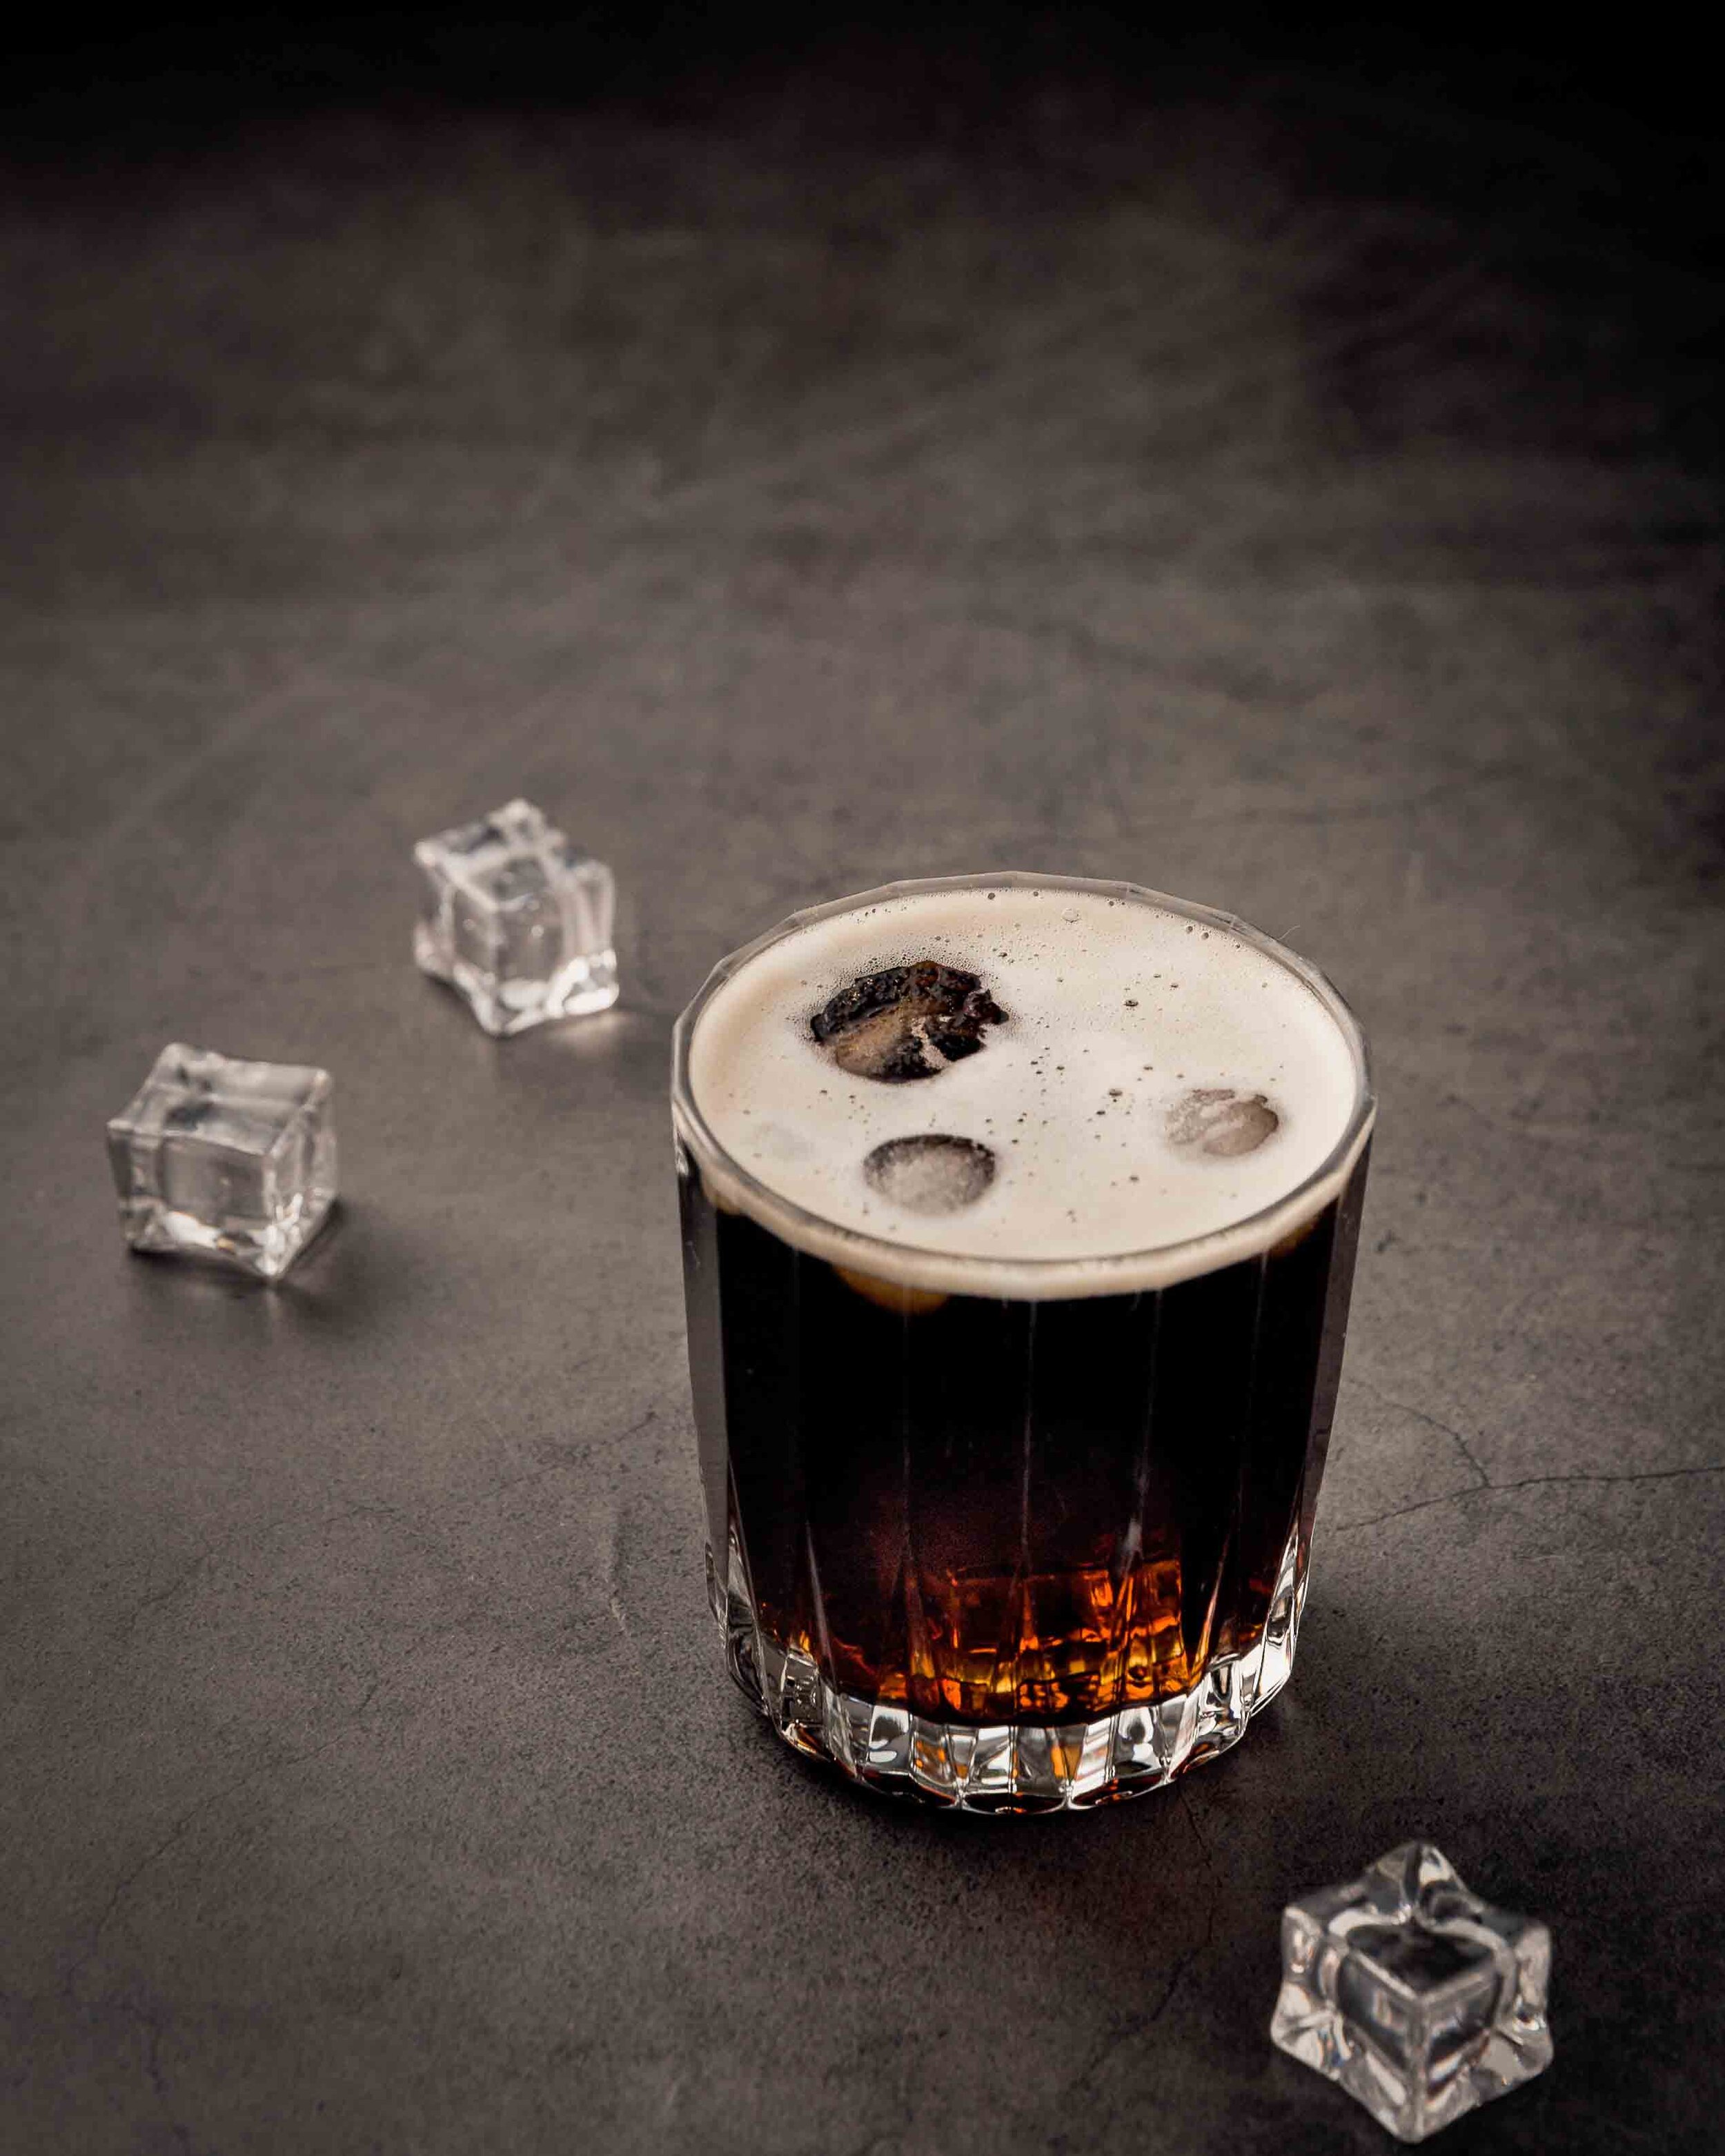 https://images.squarespace-cdn.com/content/v1/5c2e3c55cc8fed84a08c0f14/1575061077712-WOCM94E3KPA0QLQ5DUYB/Spicy+Whiskey+and+Coke+-+Fireball+Whiskey+Drinks+by+the+Drink+Addicts.jpg